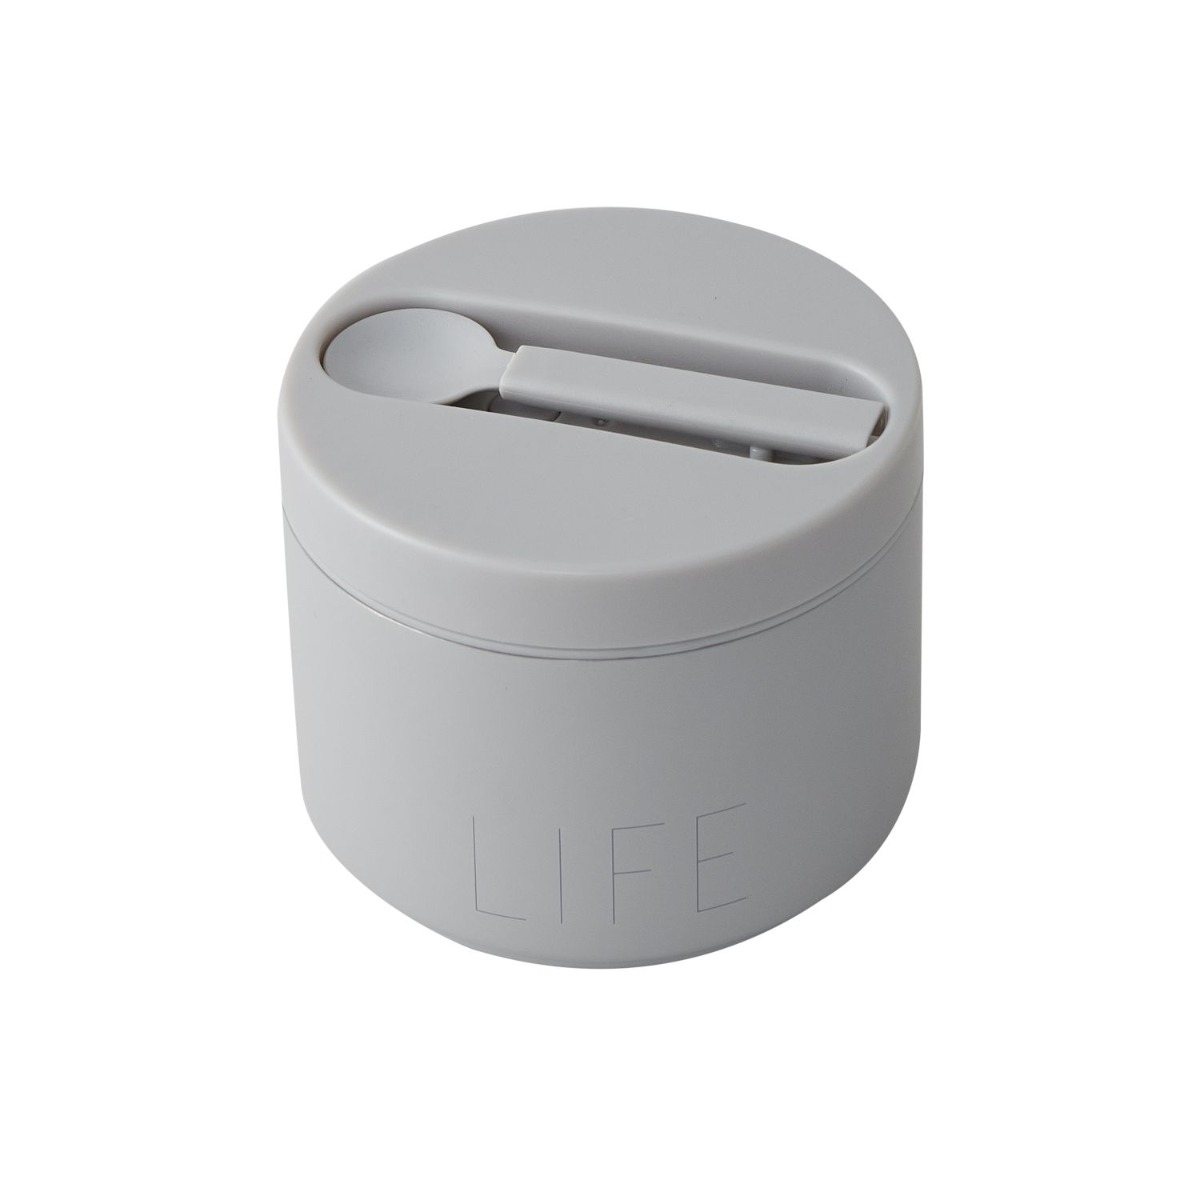 https://levi.design/wp-content/uploads/2022/11/DESIGN-LETTERS-Travel-Thermo-Lunch-Box-Small-termoskarp-GREY.jpeg